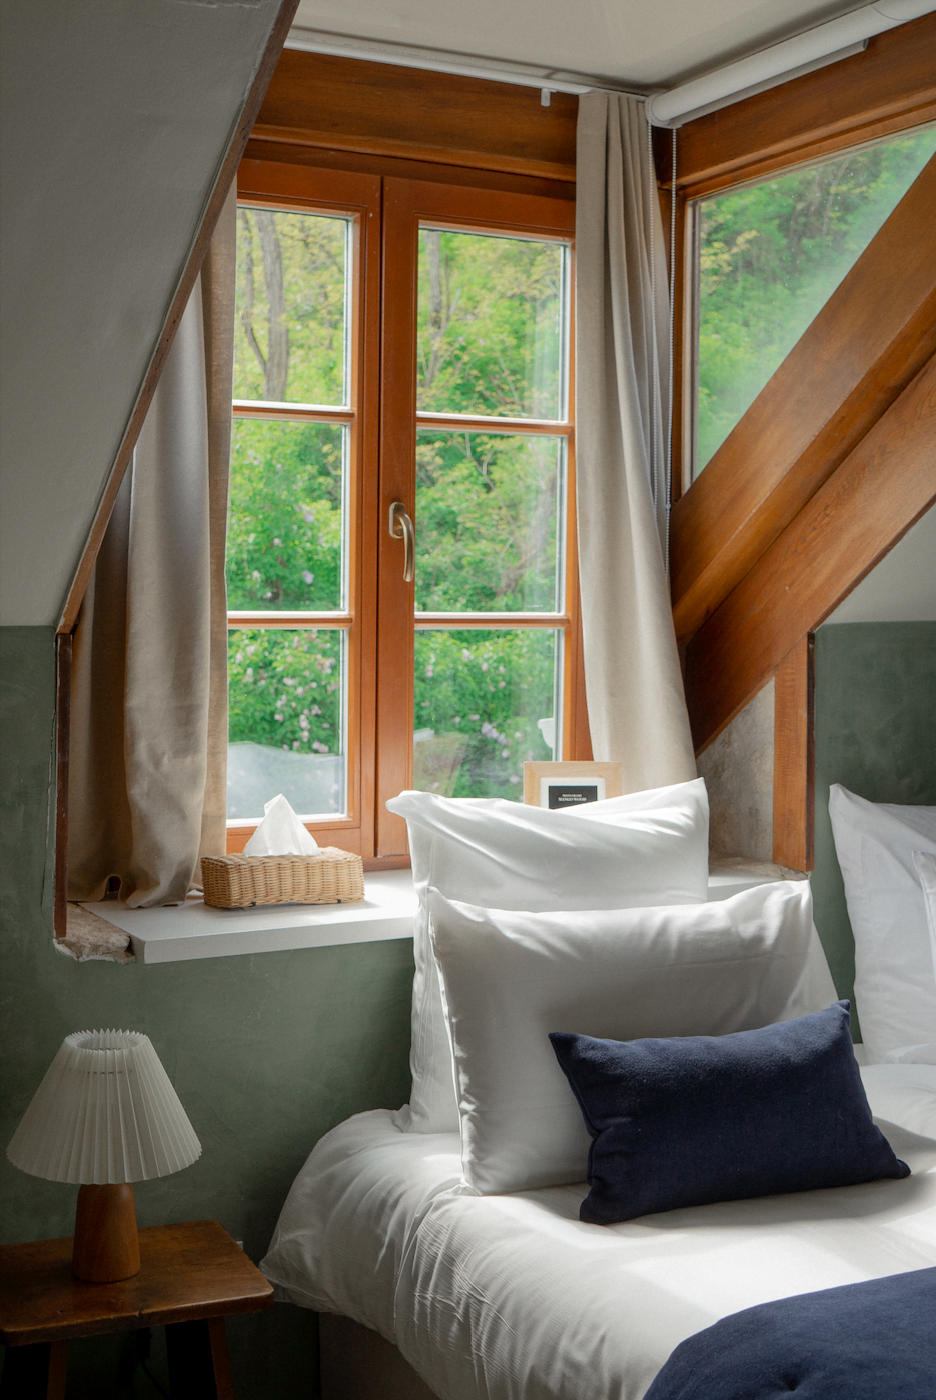 A gentle awakening in Bonsoirs bed linen, to the sound of birdsong.